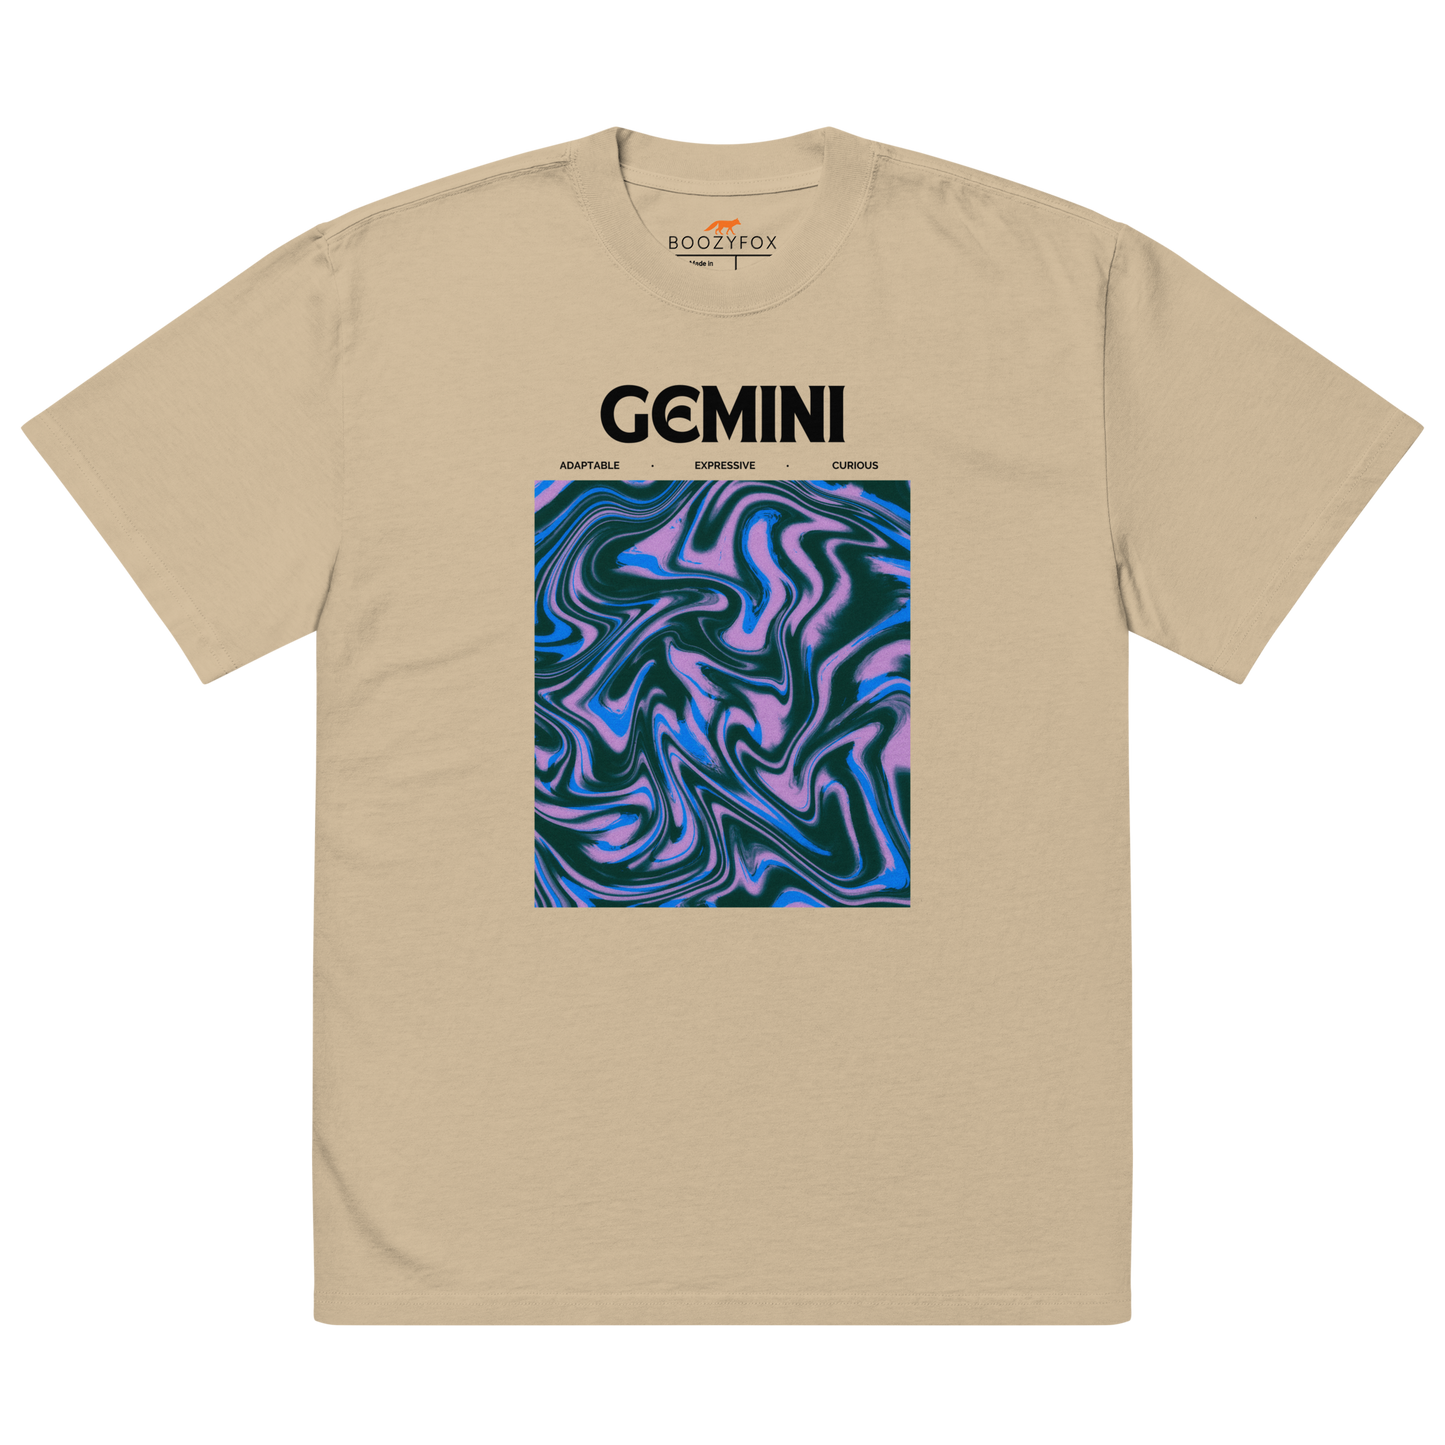 Faded Khaki Gemini Oversized T-Shirt featuring an Abstract Gemini Star Sign graphic on the chest - Cool Graphic Zodiac Oversized Tees - Boozy Fox